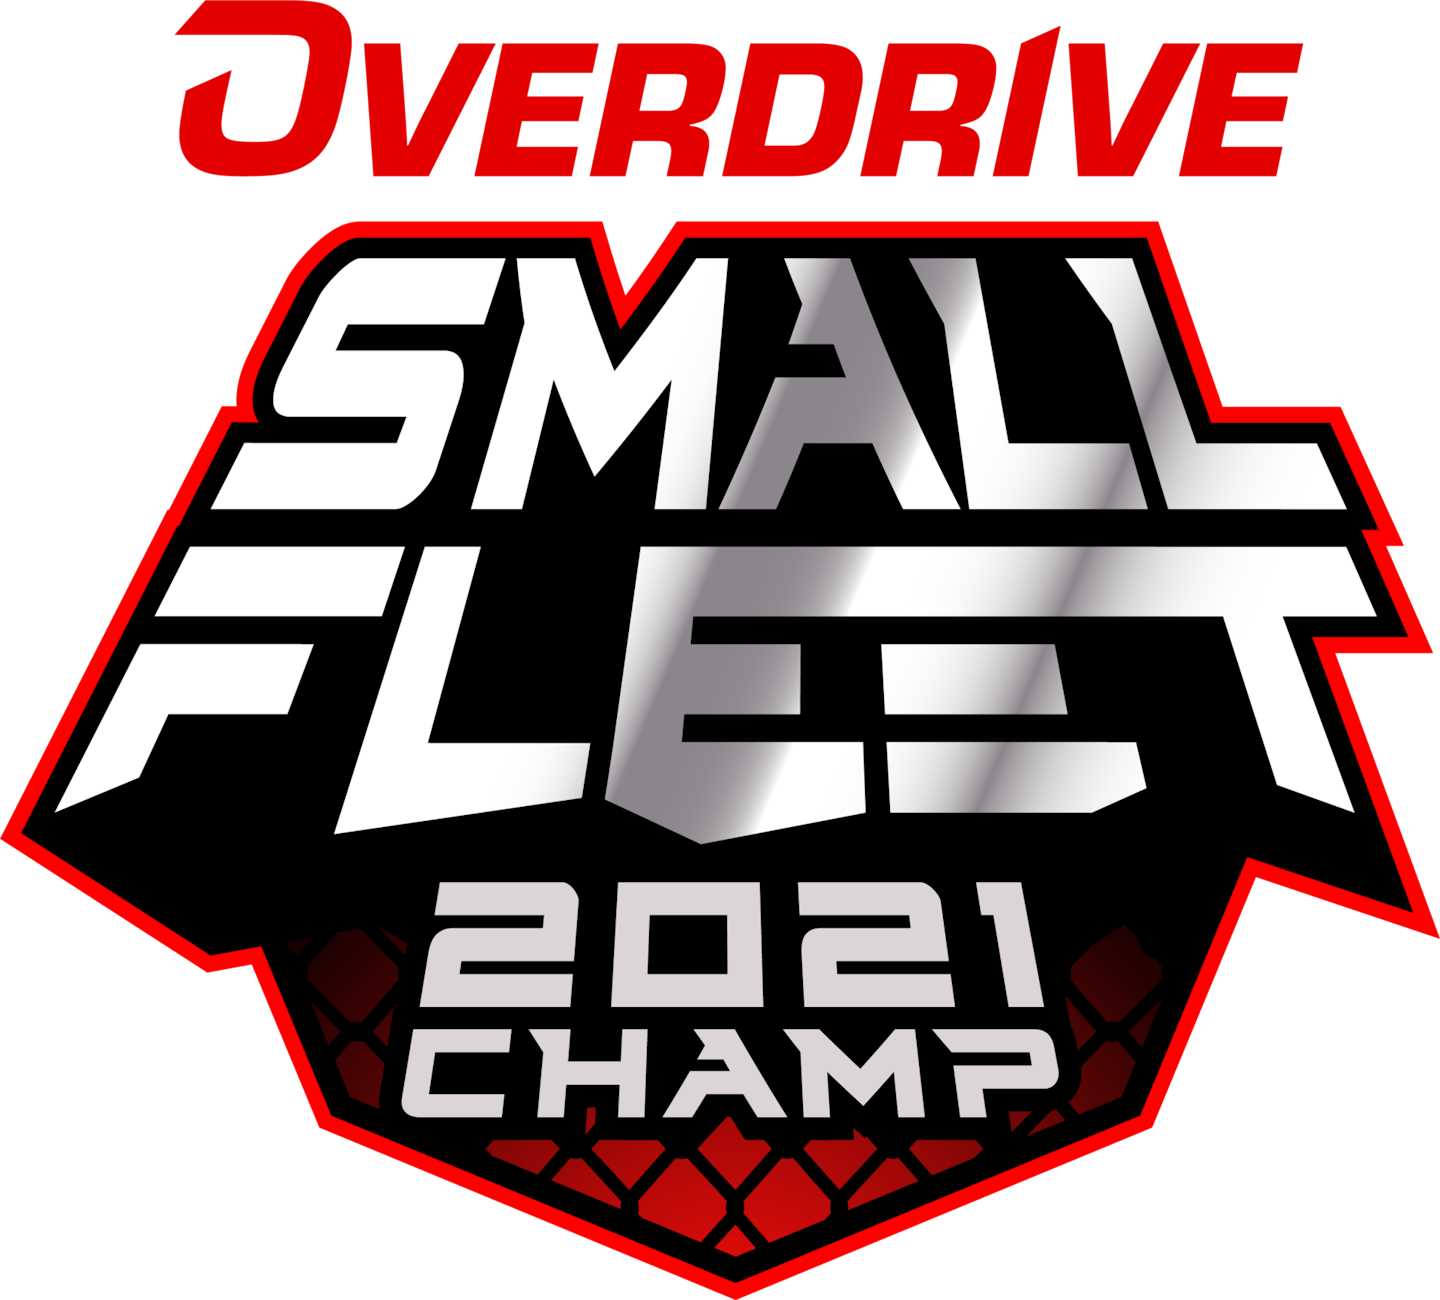 This is the seventh of 10 Small Fleet Champ semi-finalist profiles that will air here on Overdrive ahead of the finalists announcement later in October.  Access all profiles via this link.  The final winner will be announced at the National Association of Small Trucking Companies November 4-6 conference in Nashville, Tennessee.